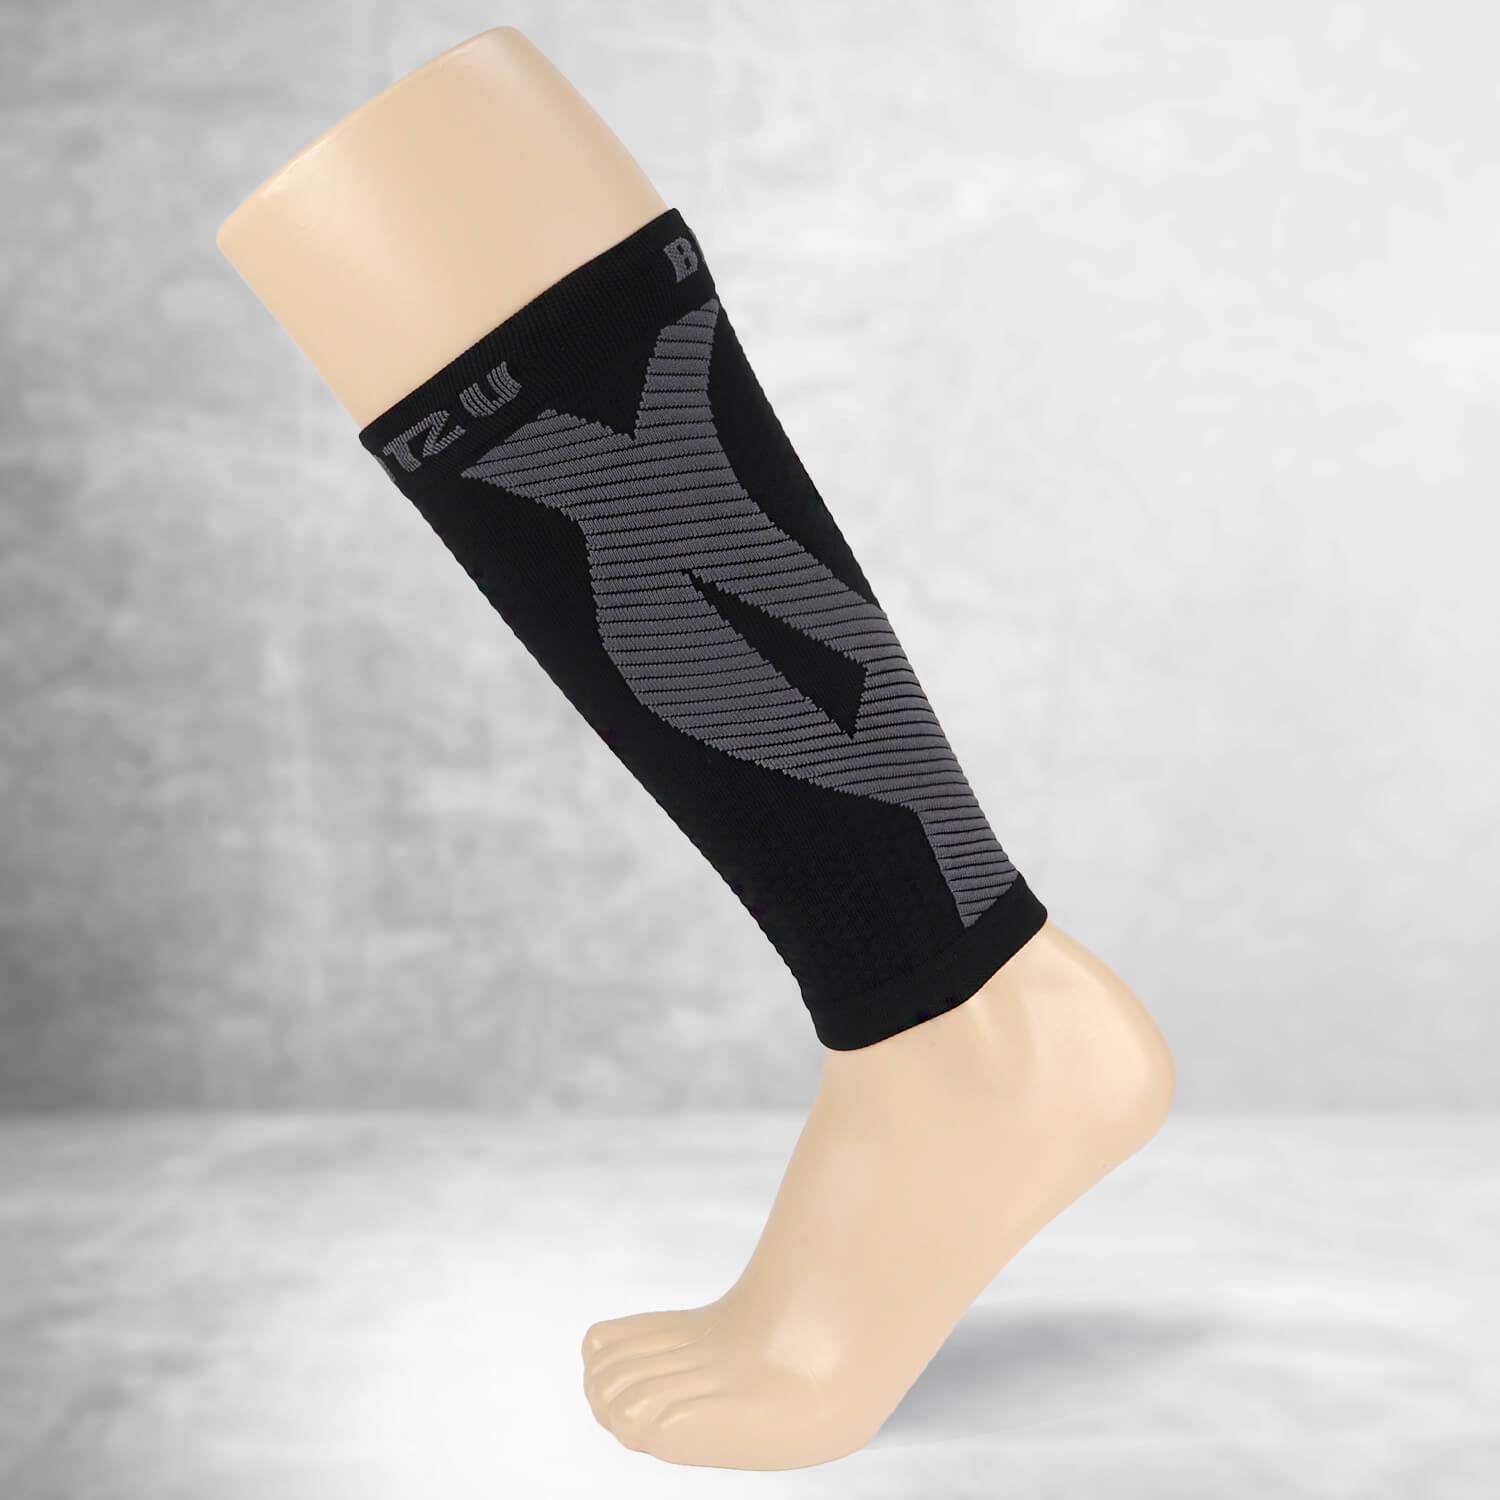 Calf Sleeves | 15-18 MMHG Recovery Wrap for Calf & Shin Pain Relief w/ KT  Technique